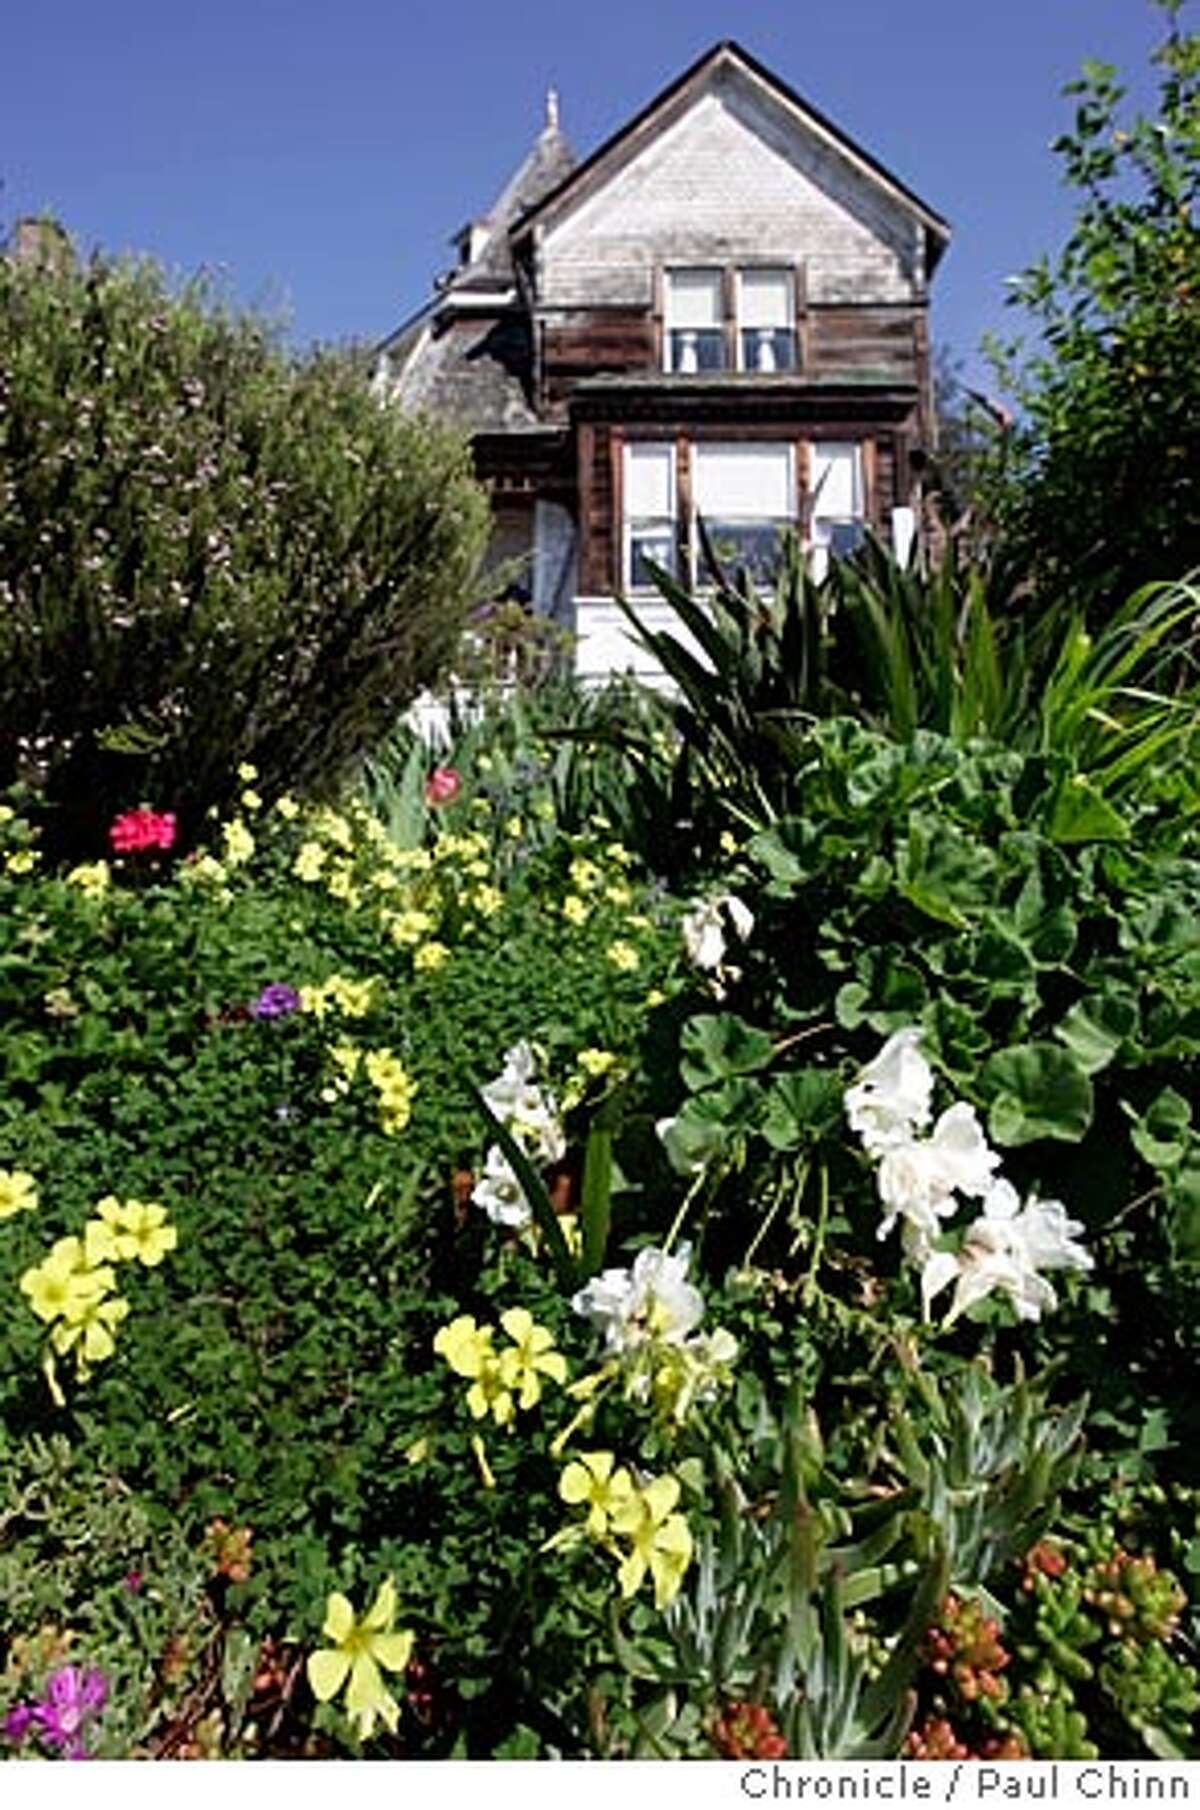 Flowers bloom in the front yard of an 1886 Victorian by architect Ira Boynton at 1431 Arch St. Bob Johnson, a member of the Berkeley Landmark Preservation Commission, toured of some of the city's most impressive architectural gems on 3/29/05 in Berkeley, CA. PAUL CHINN/The Chronicle